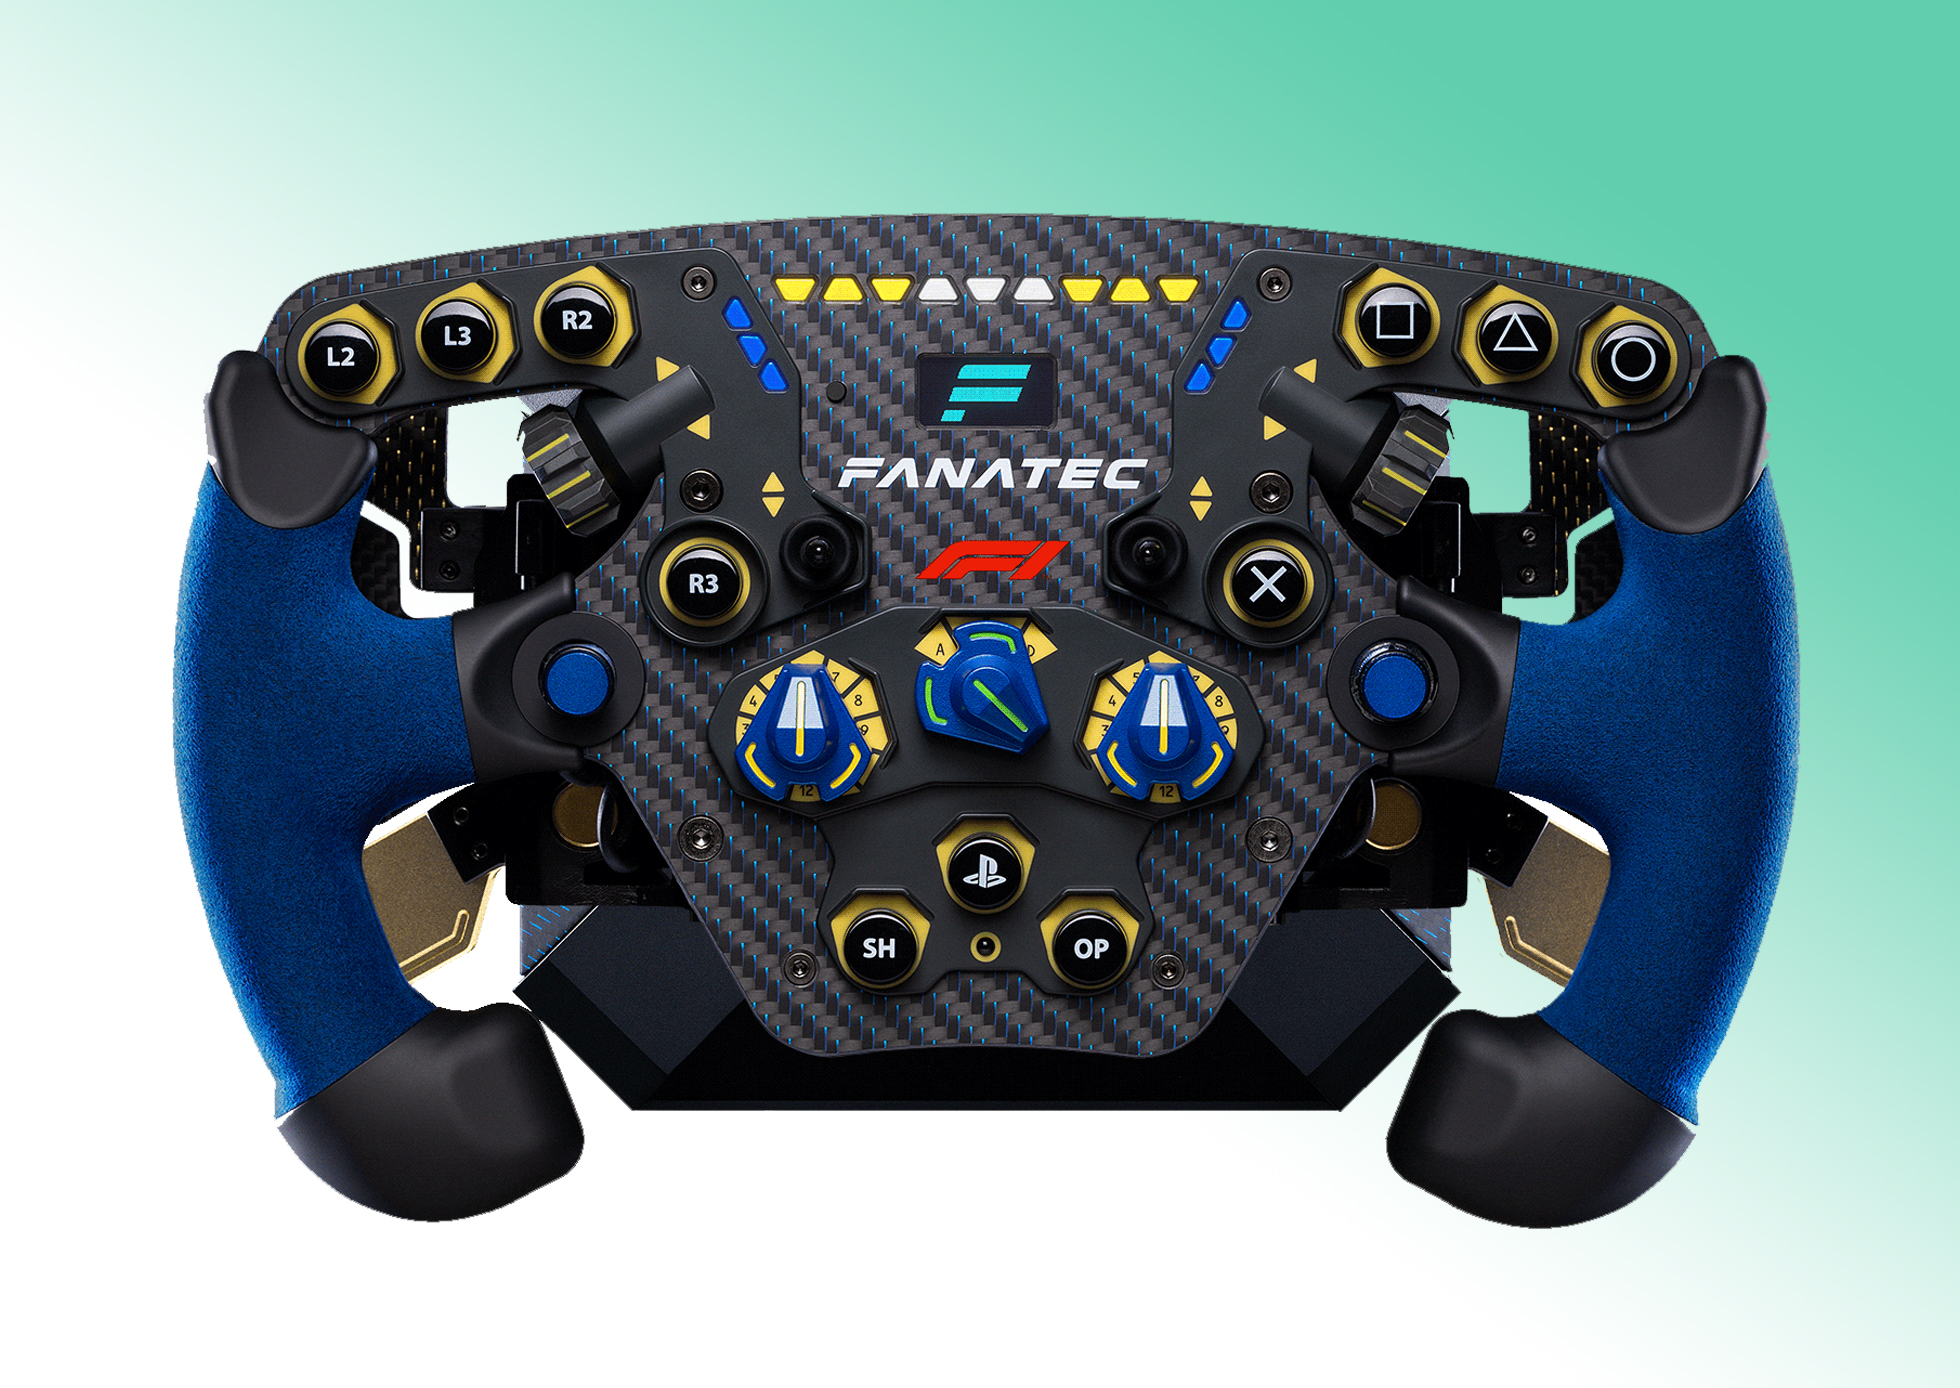 Test and opinions on the Fanatec Podium Racing Wheel F1